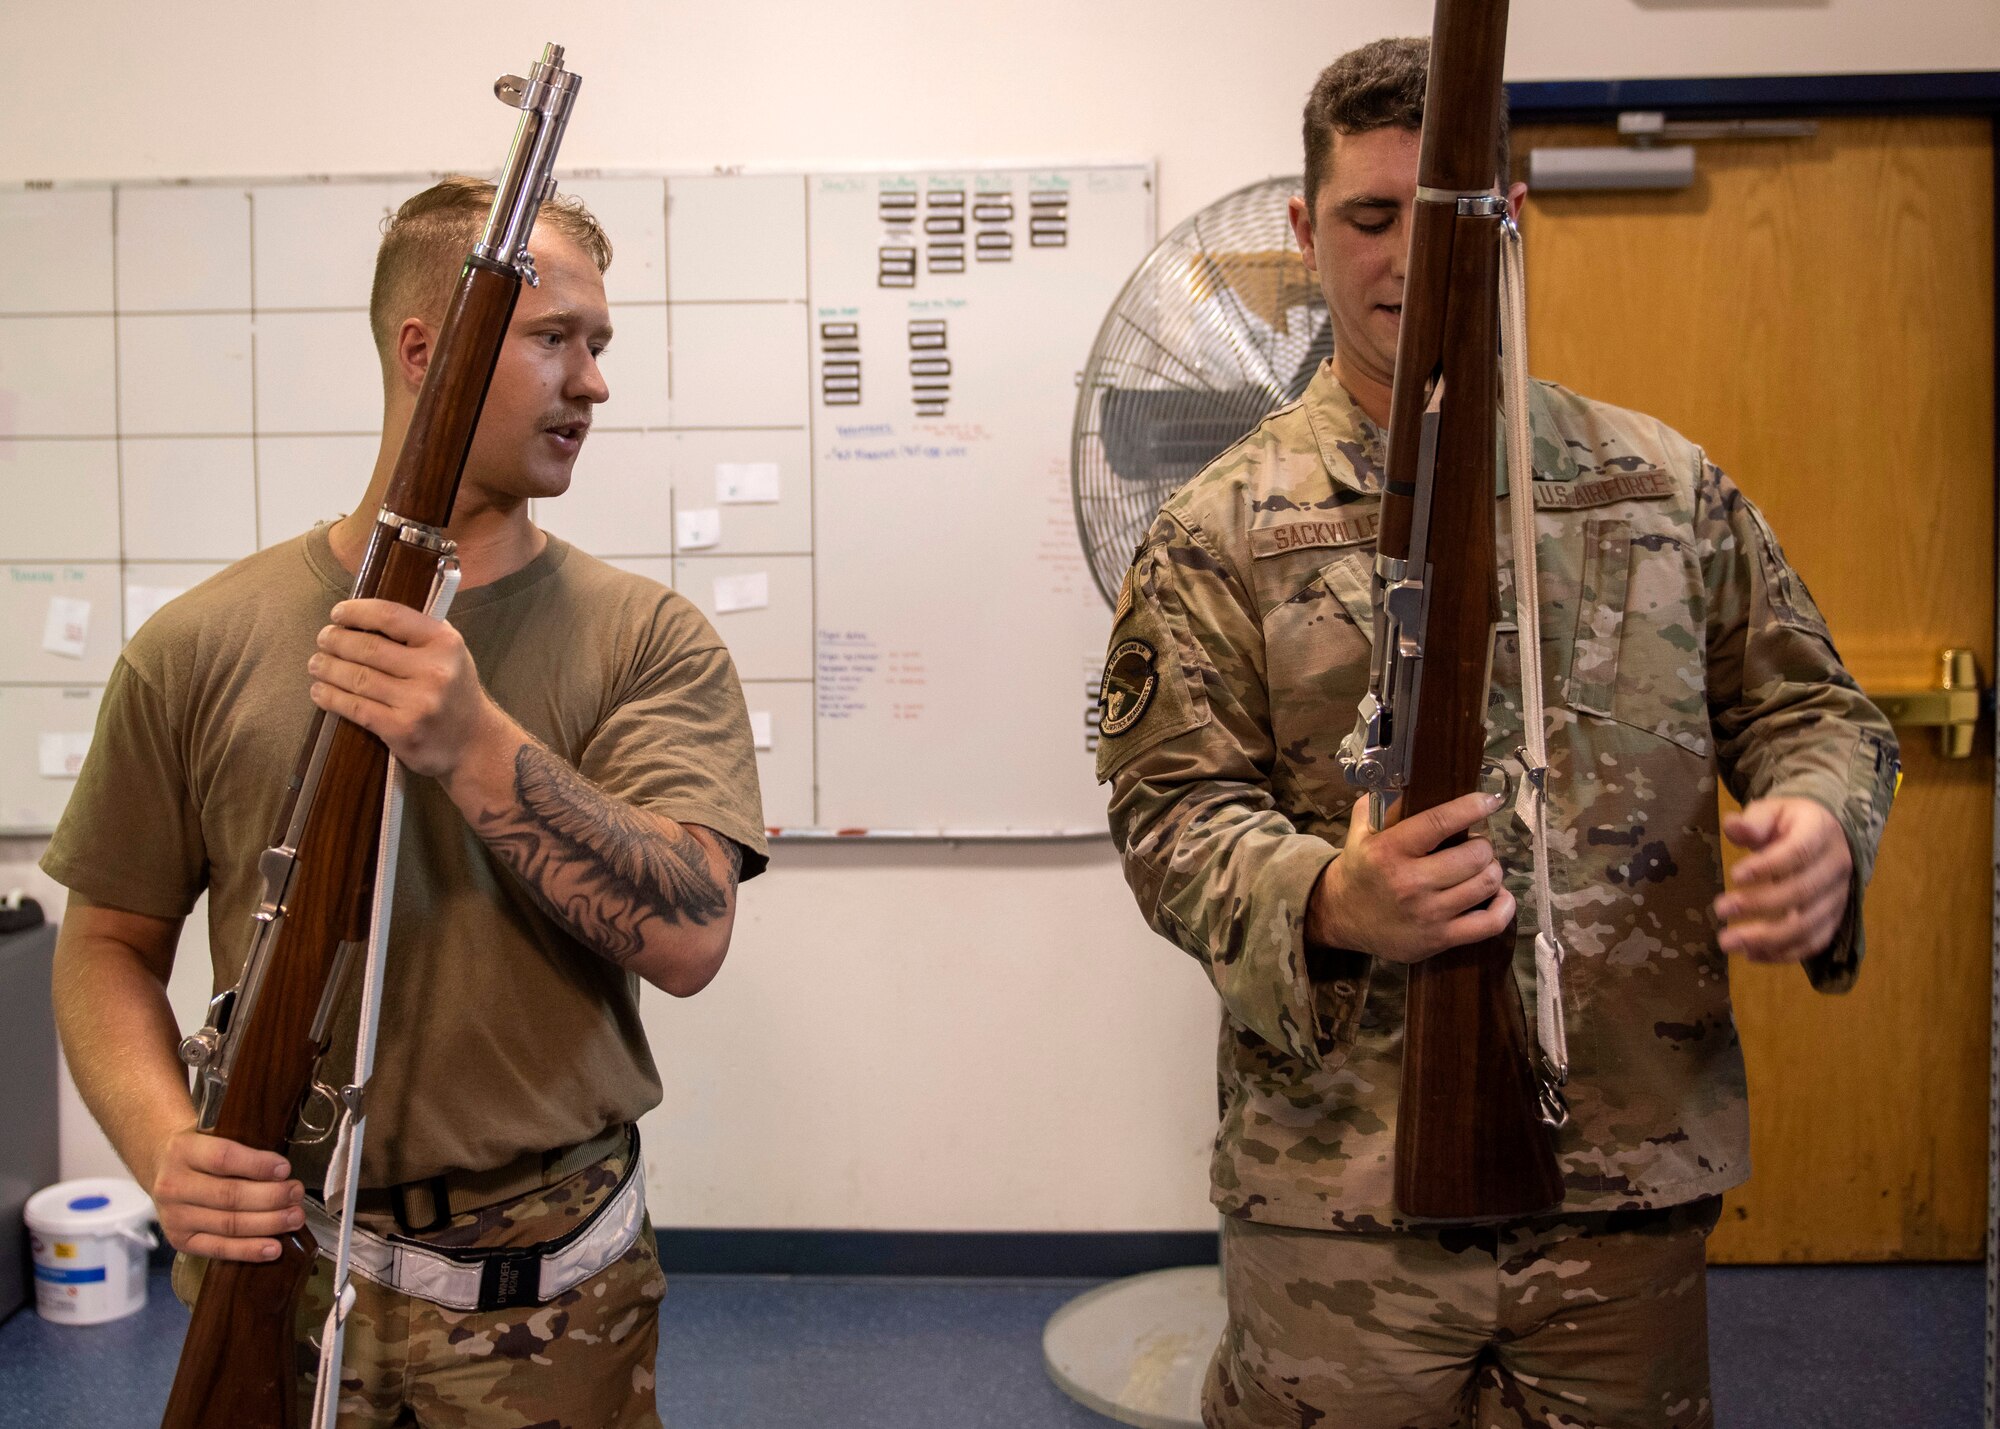 U.S. Air Force Airman 1st Class Dawson Winder, a Joint Base Elmendorf-Richardson Honor Guardsman, teaches an Airman how to hold a rifle during an Honor Guard Open House at JBER, Alaska, July 19, 2021. The Honor Guard hosted the event to encourage Airmen to participate in the Honor Guard program. (U.S. Air Force photo by Senior Airman Emily Farnsworth)